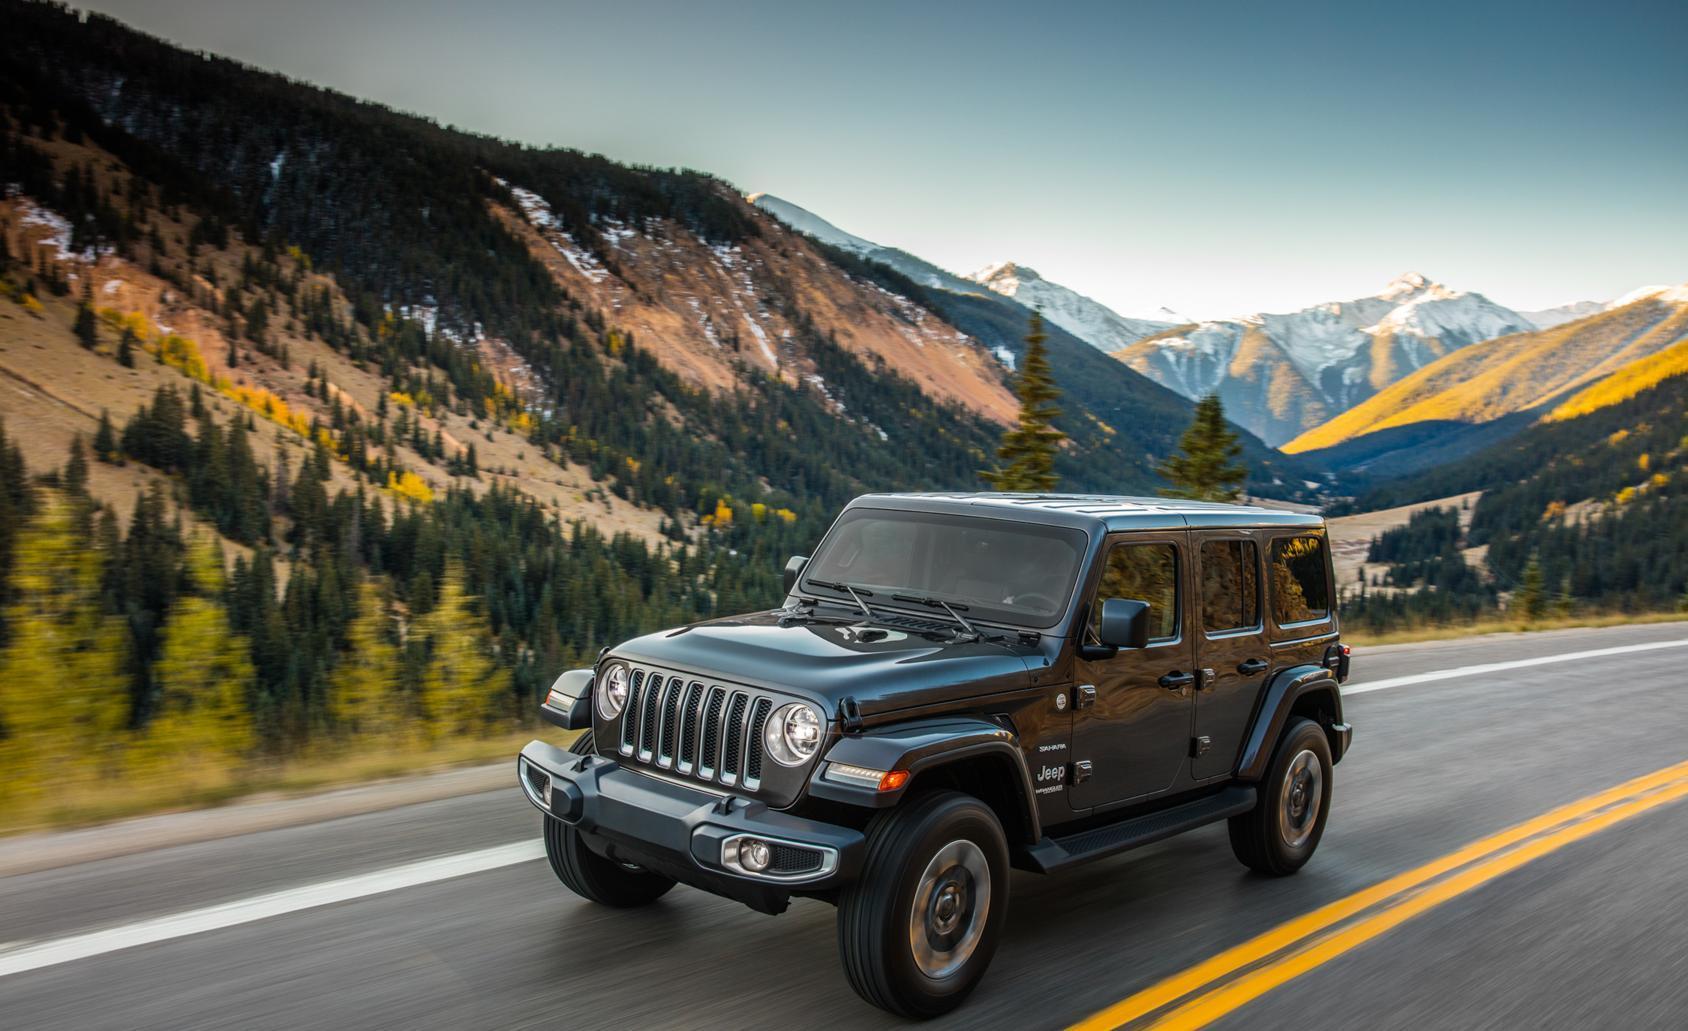 All-New 2018 Jeep Wrangler is official and aims to be most capable SUV